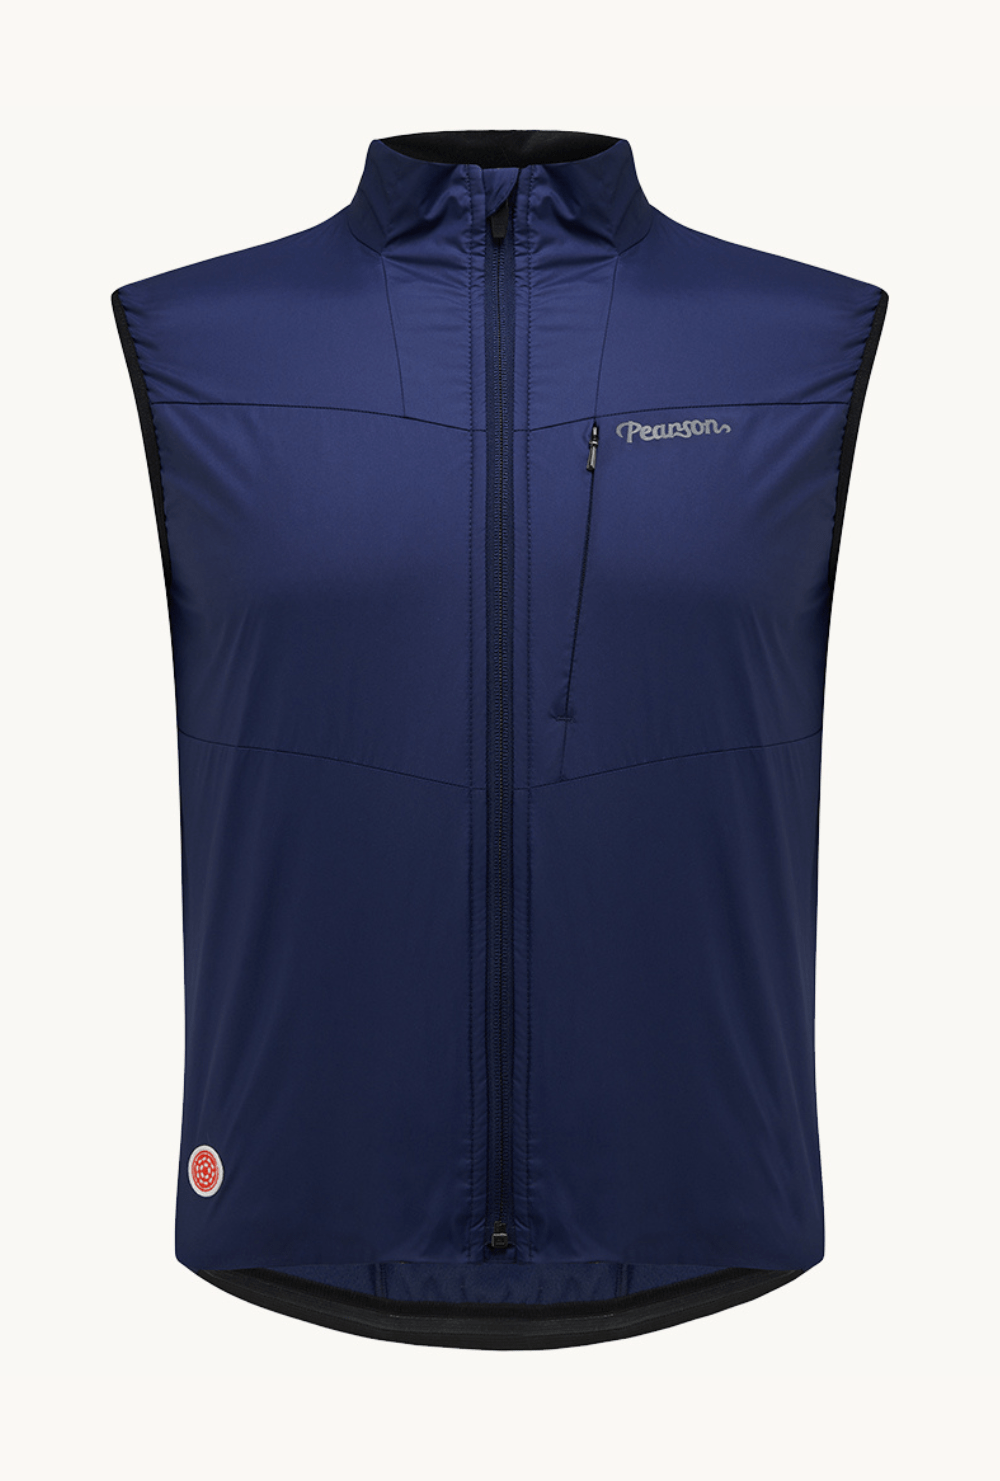 Pearson 1860  Feel The Benefits - Road Insulated Gilet Blue Ink  X-large / Blue Ink